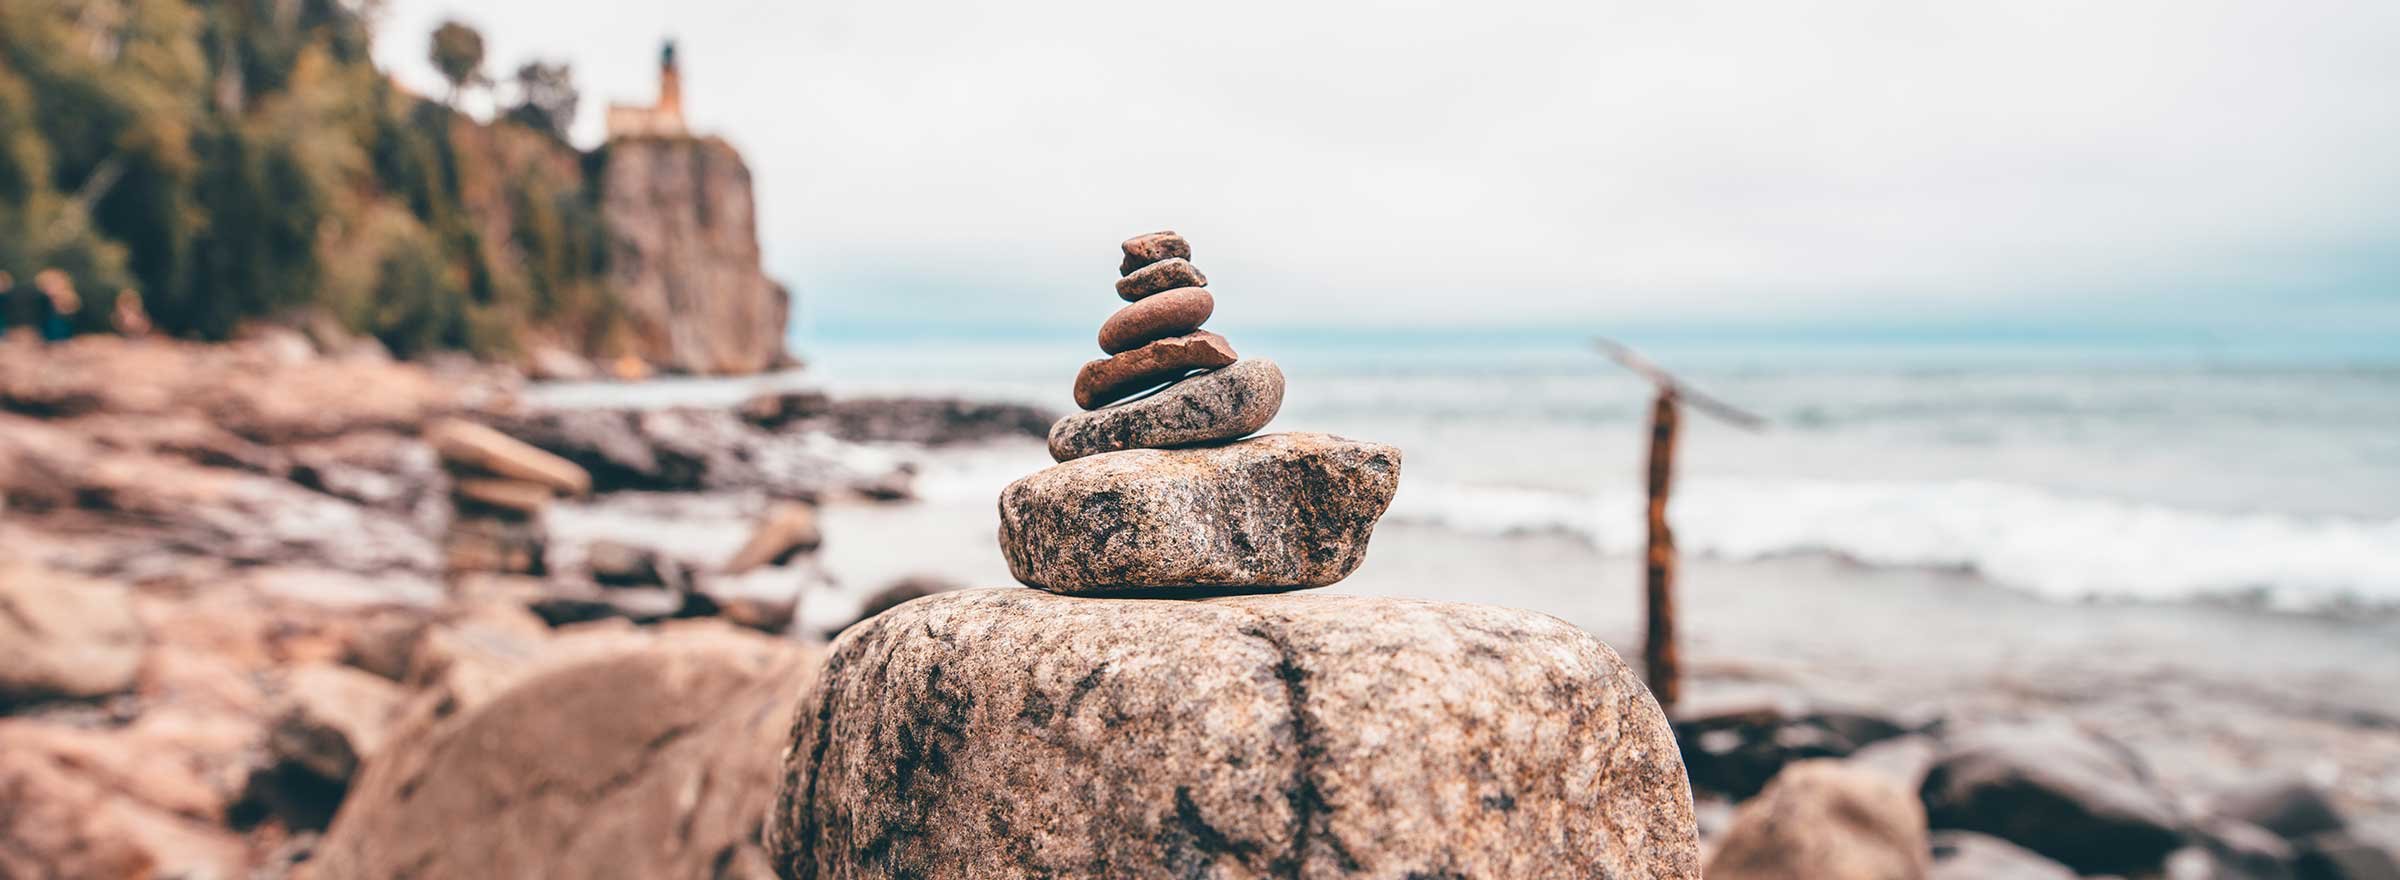 a cairn of piled rocks, symbolizing the way toward nonprofit stability and sustainability